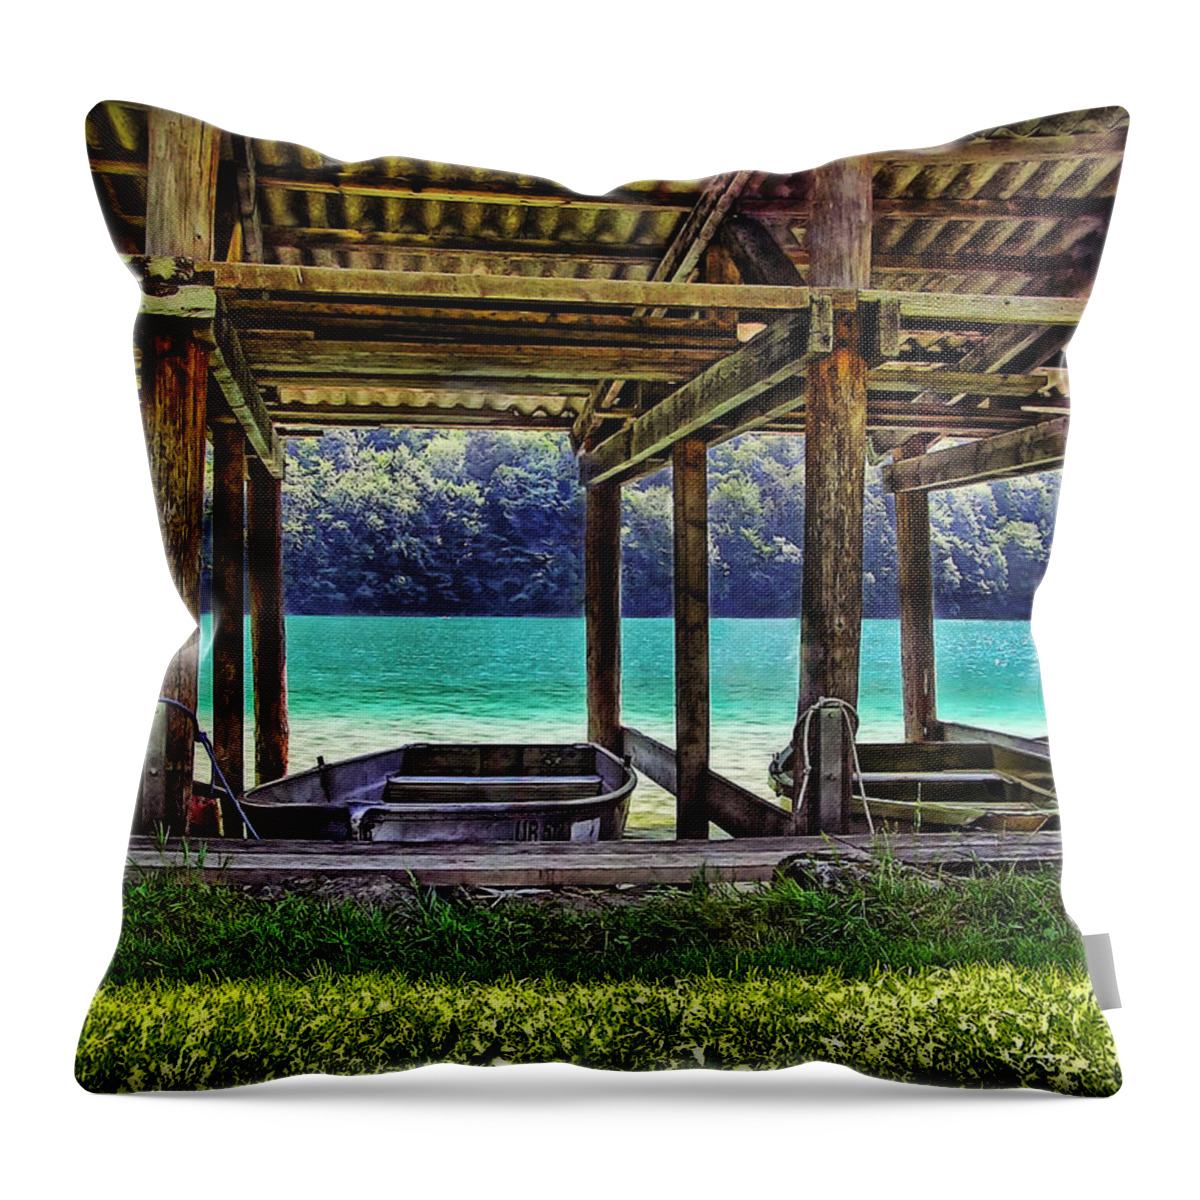 Switzerland Throw Pillow featuring the photograph Rowboat Parking by Hanny Heim